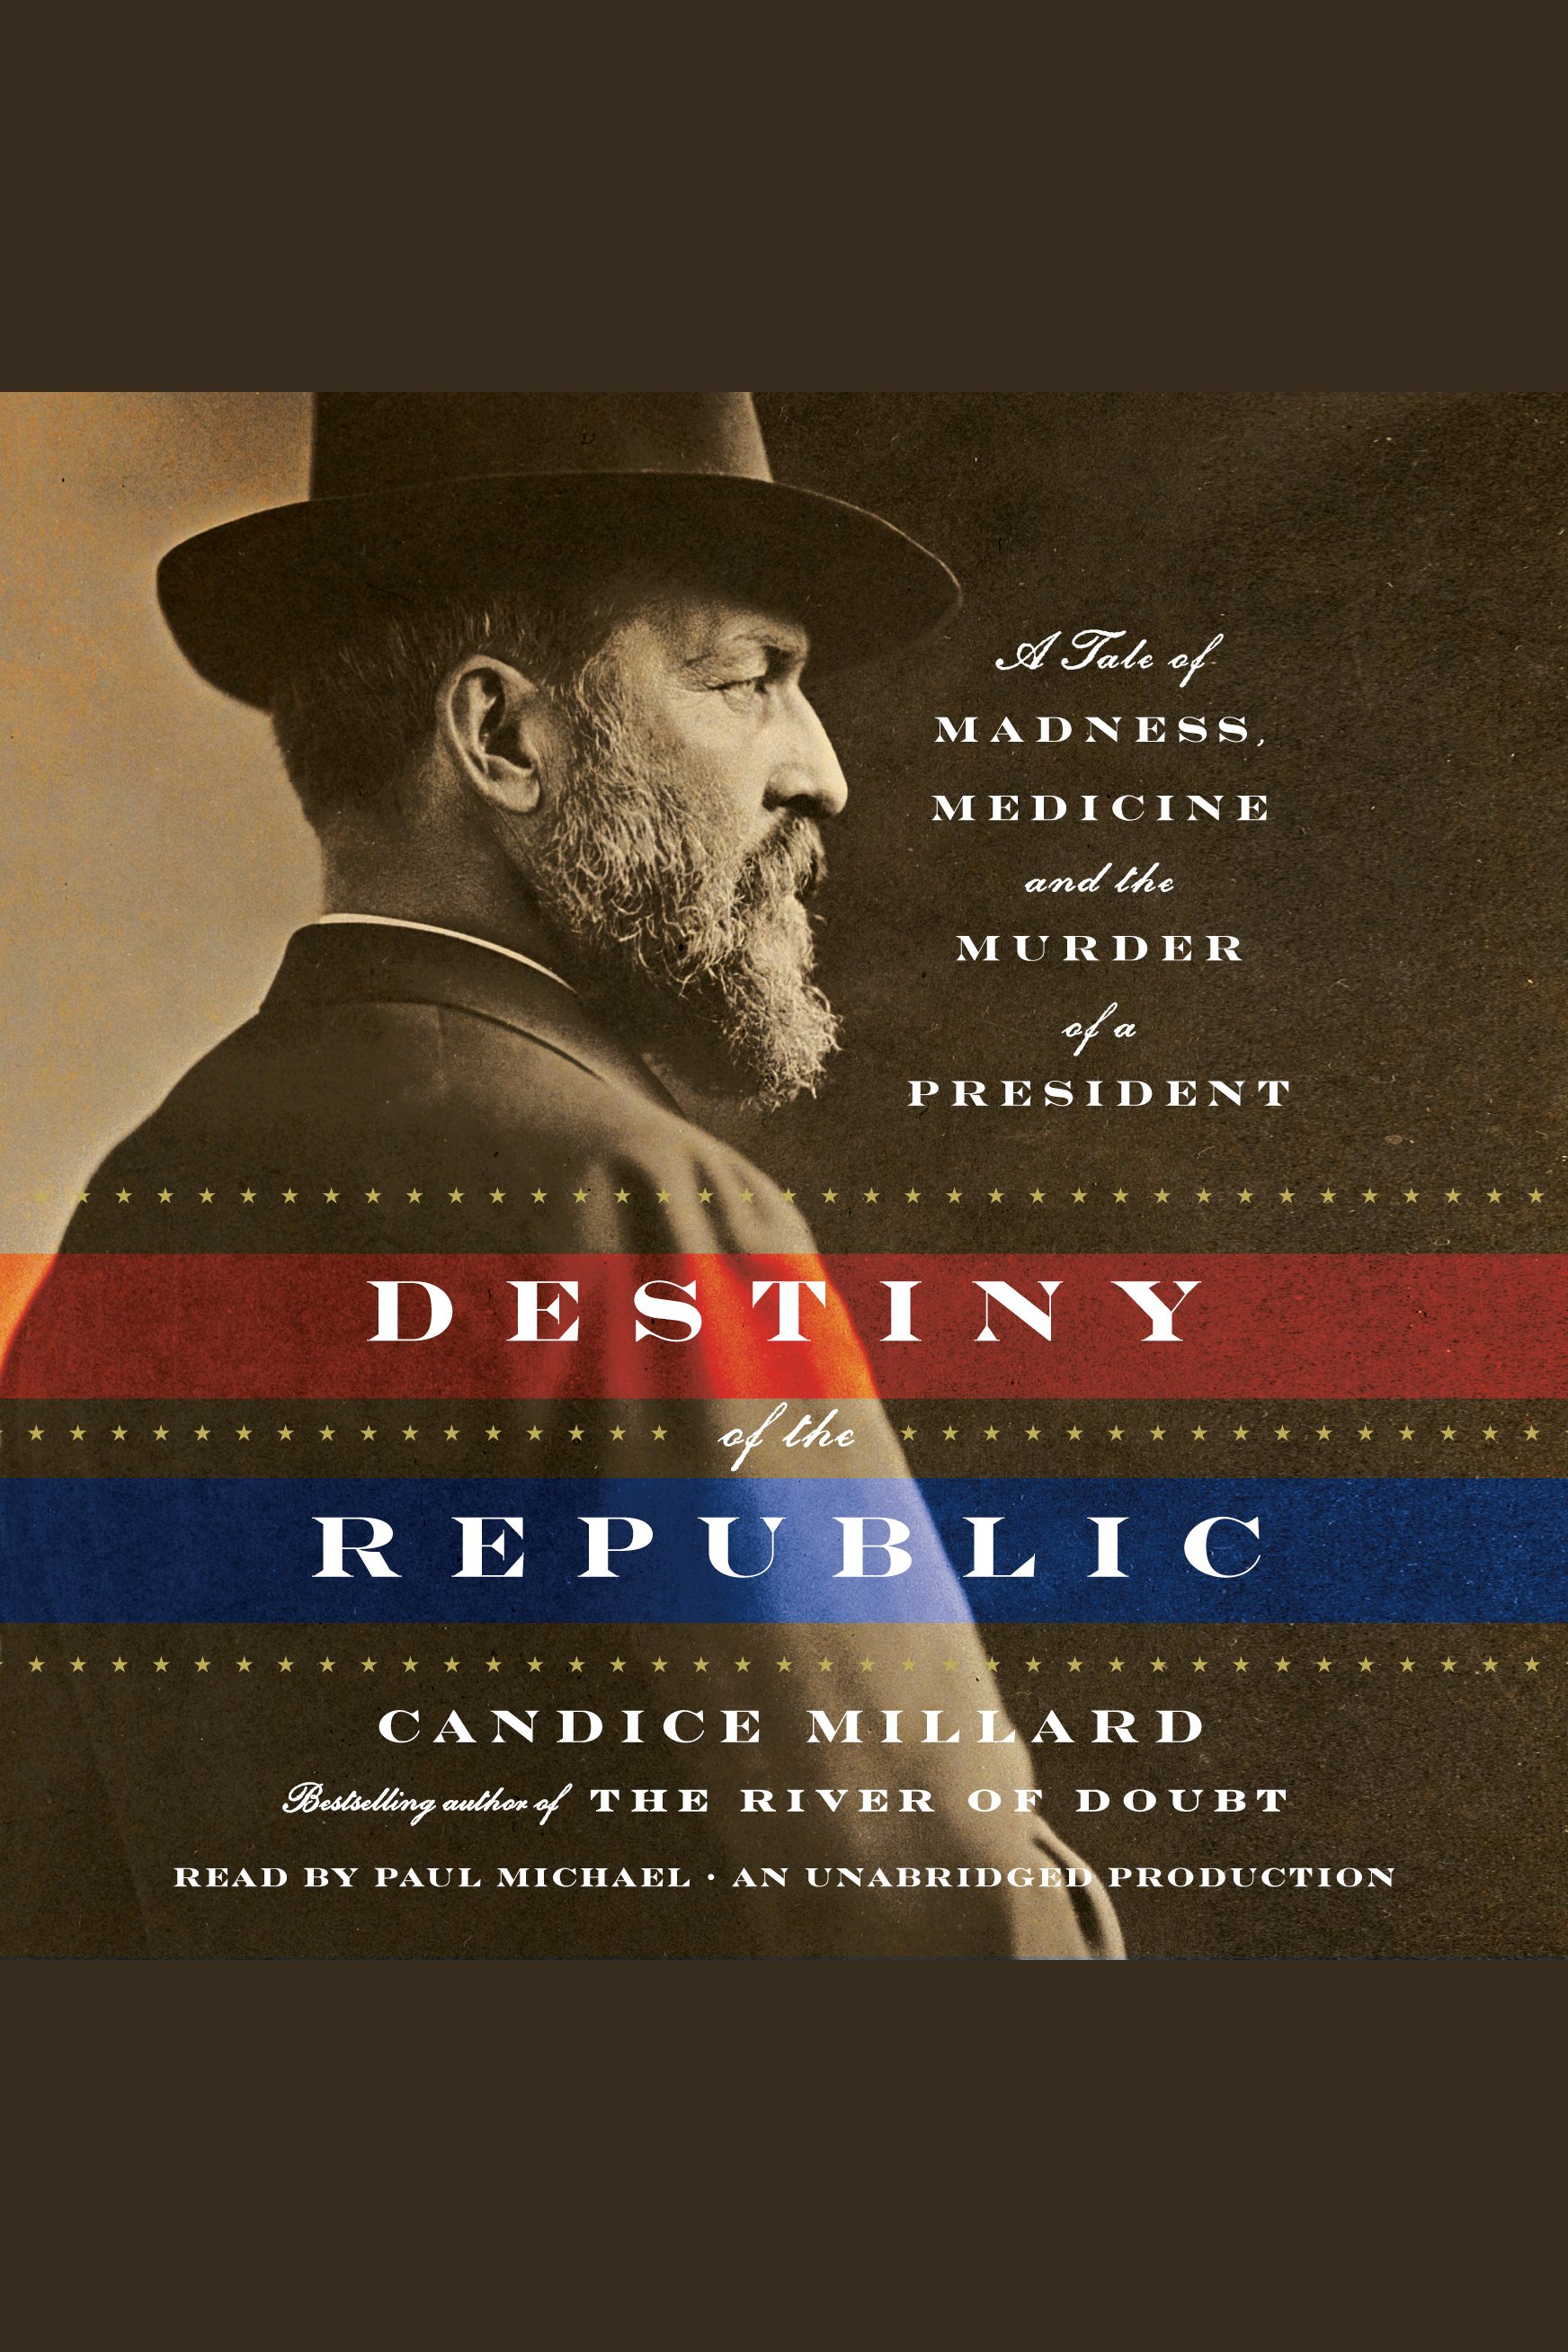 Destiny of the republic a tale of madness, medicine and the murder of a president cover image